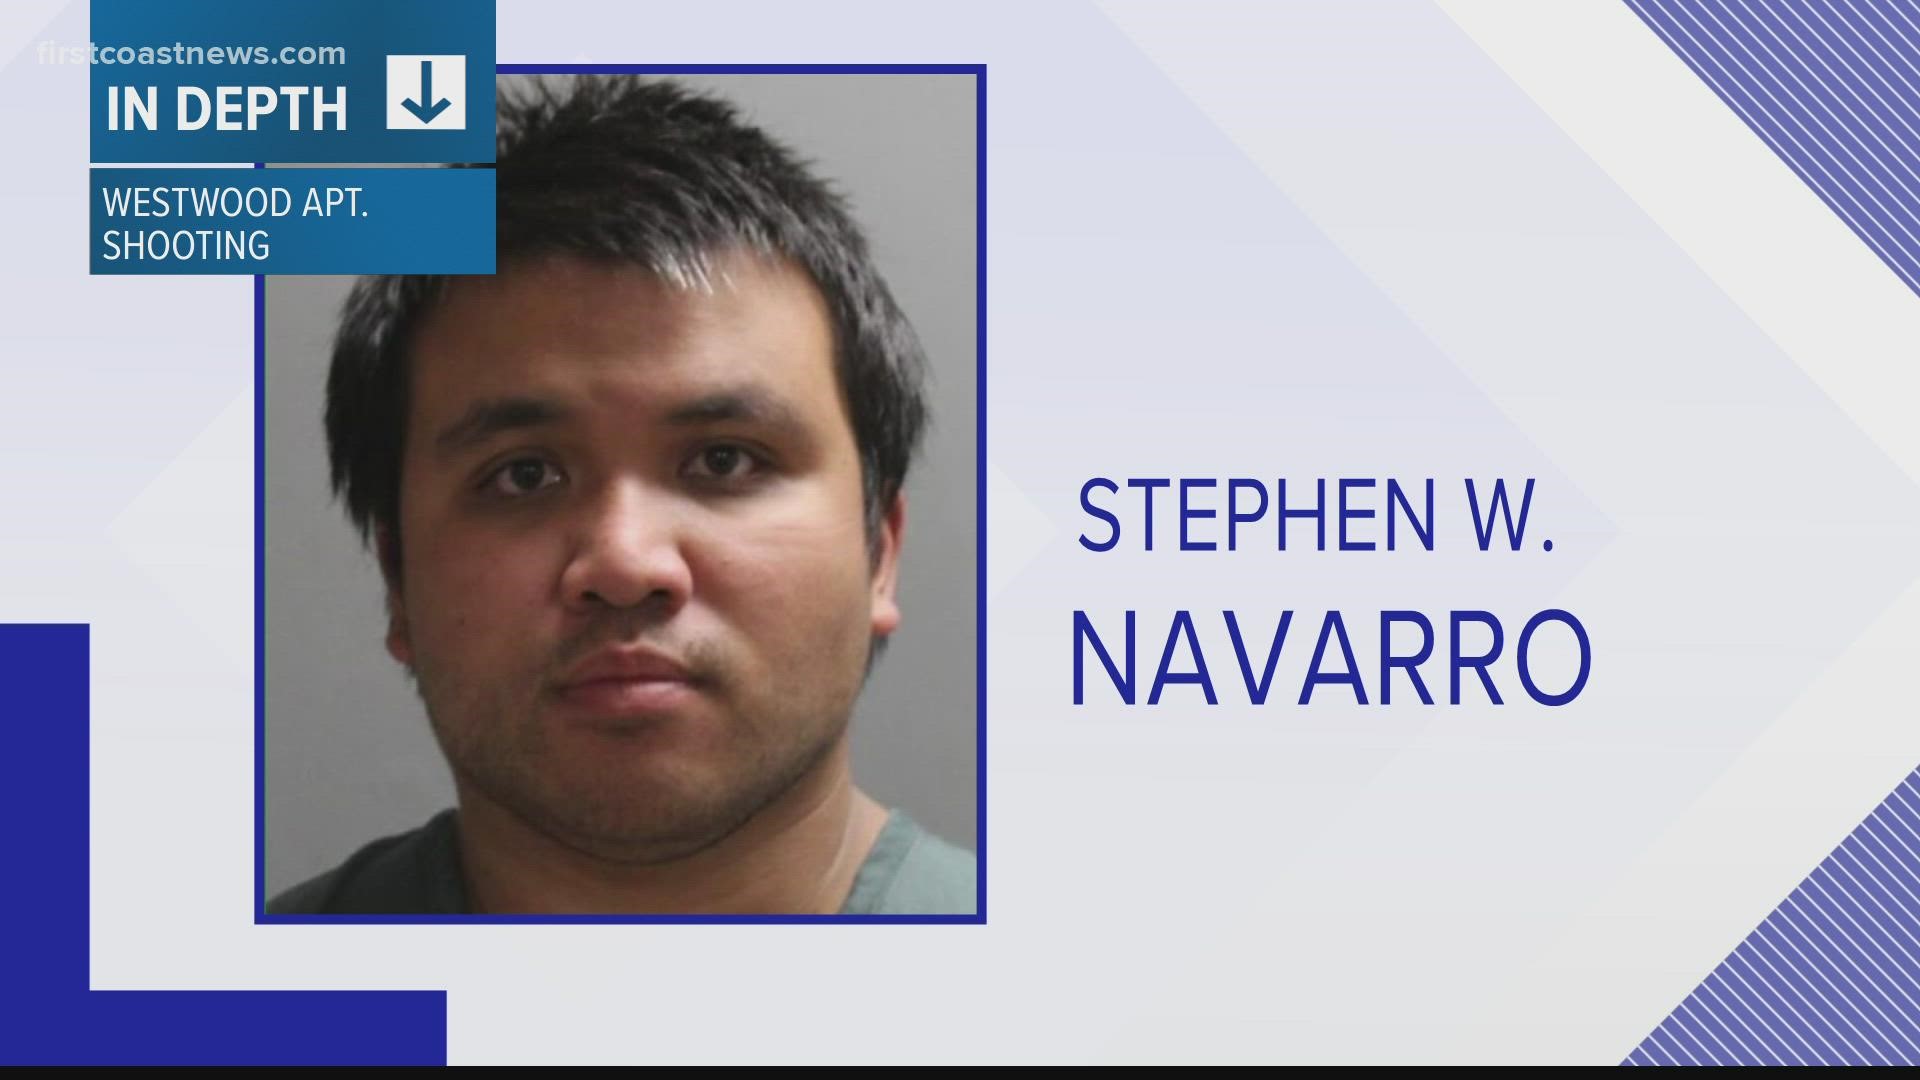 Stephan W. Navarro is in jail on a second-degree murder charge.